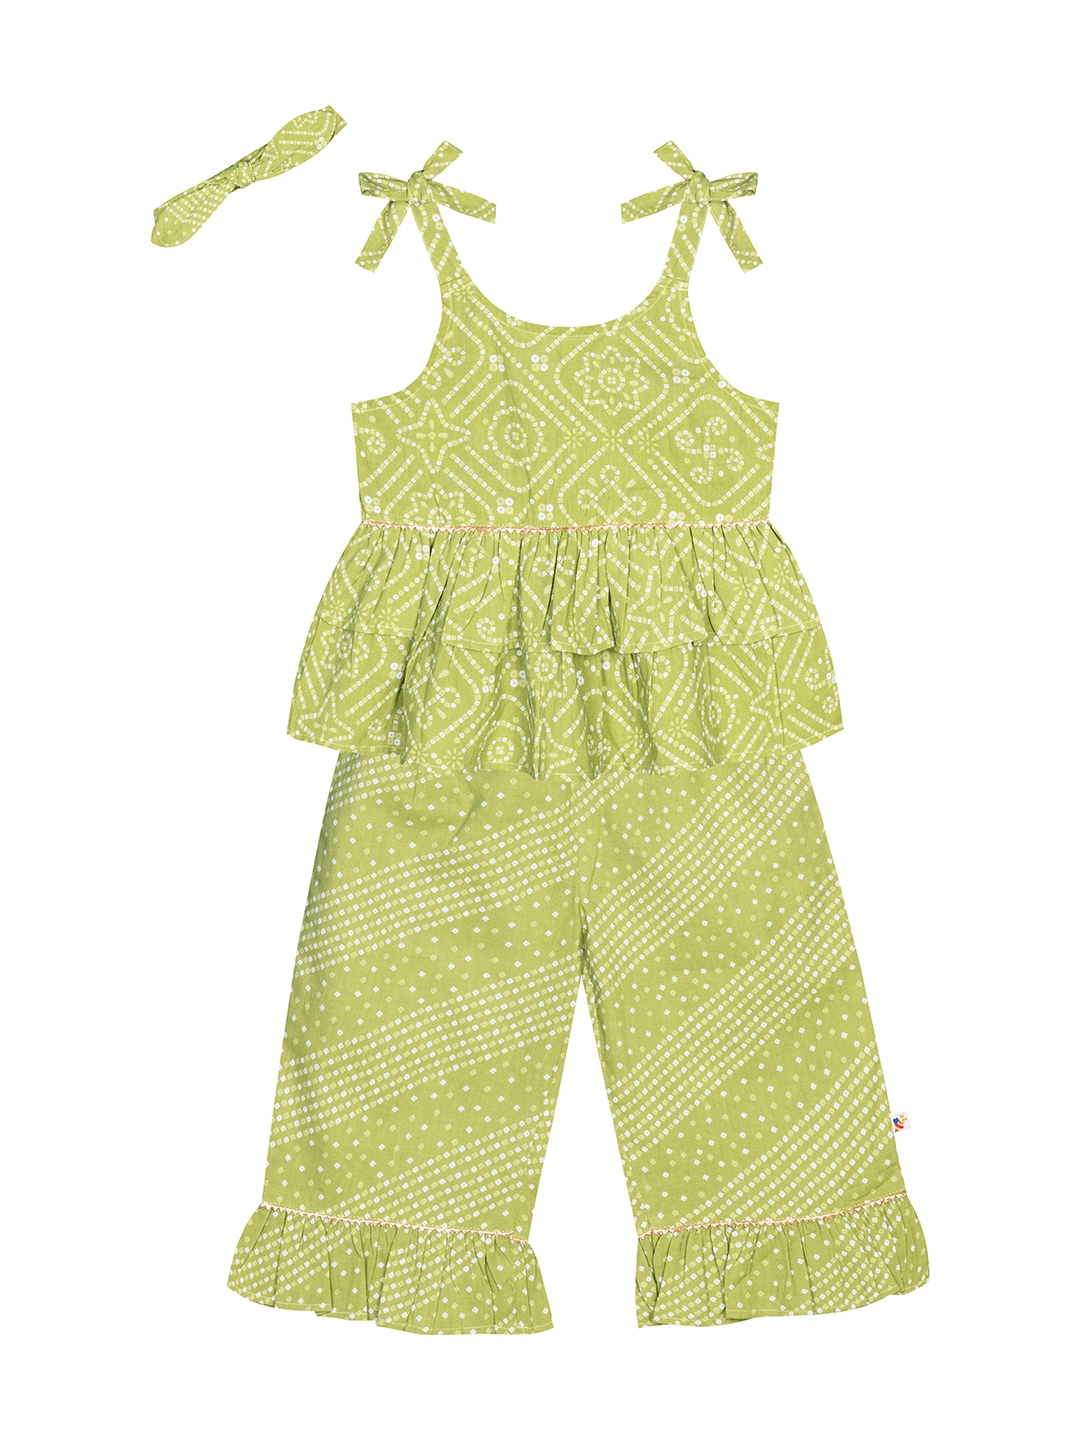 Budding Bees | Budding Bees Infants Cotton Top-Pajama Set with Matching Hairband-Green 0